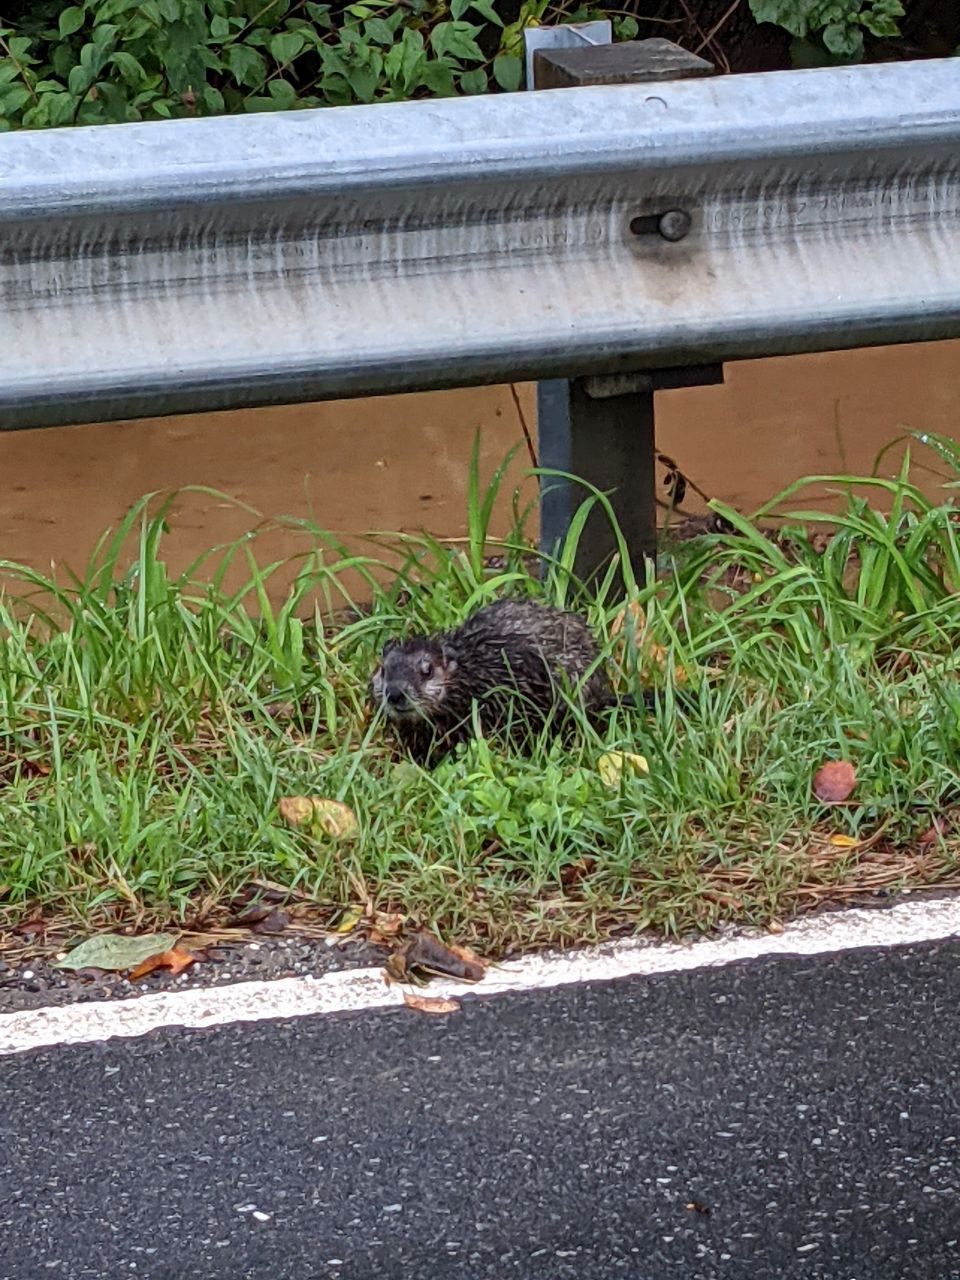 Wet groundhog is sitting by side of road, next to guiard rails. There is aFlooded creek behind the groundhog